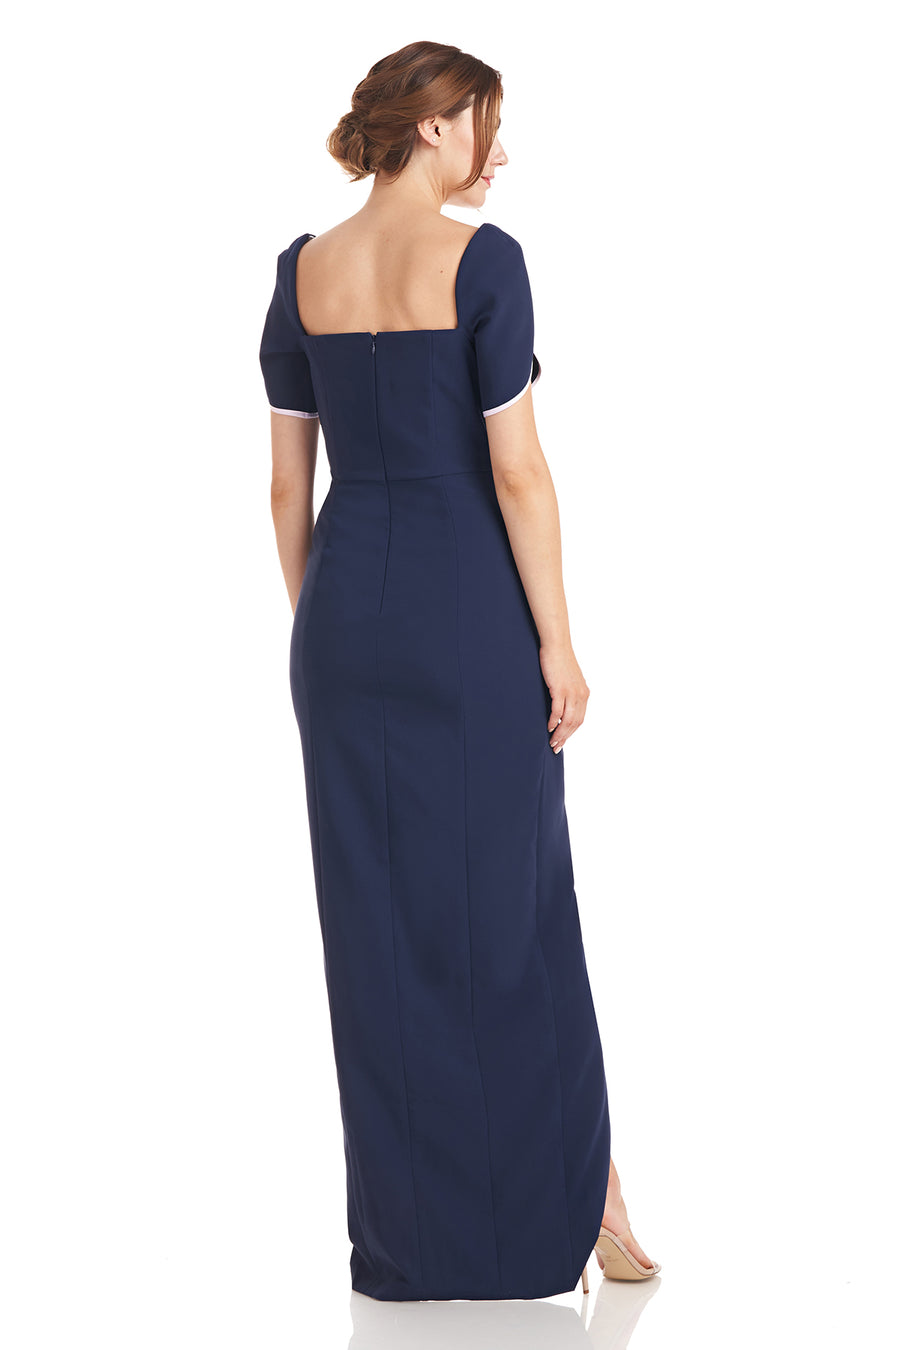 Delilah Scallop Neck Gown